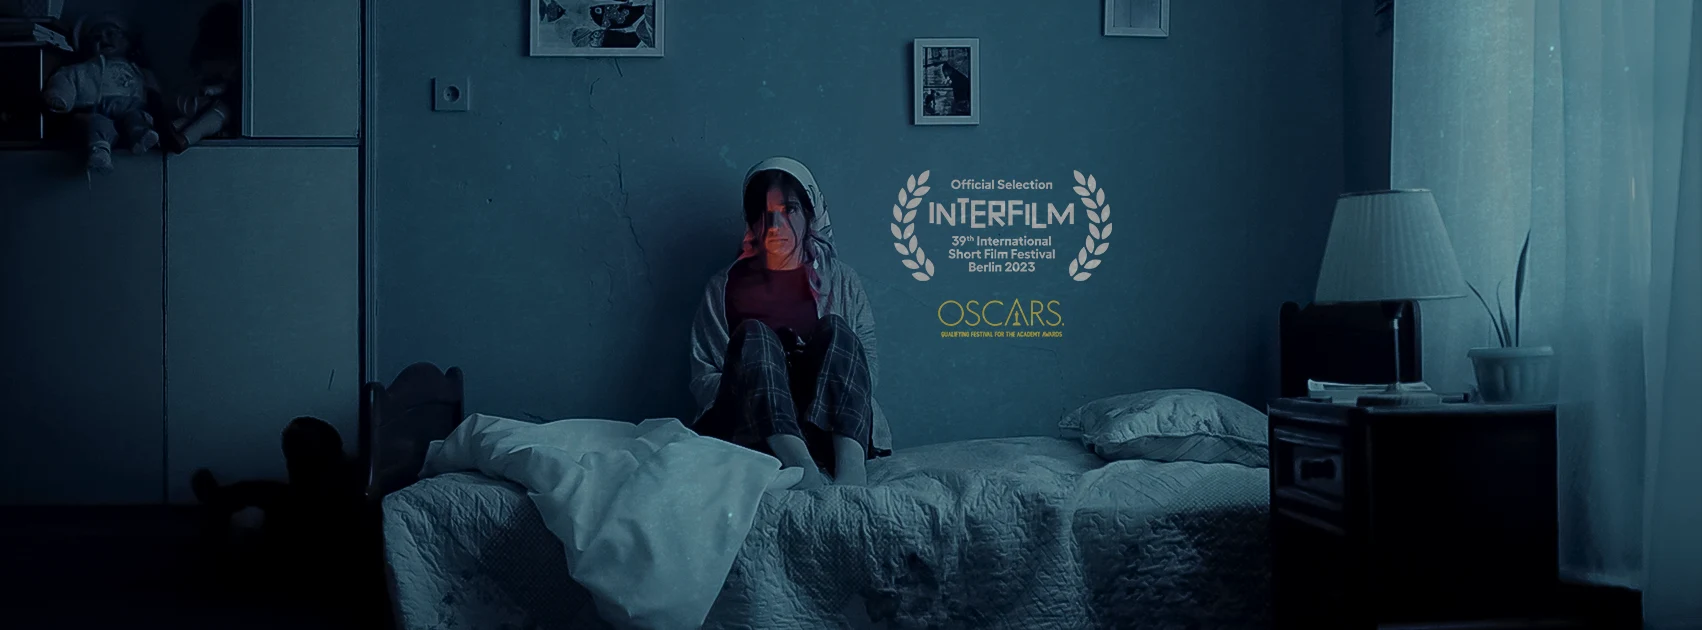 The short film "The thirteenth year" in competition at the 39th Interfilm Berlin